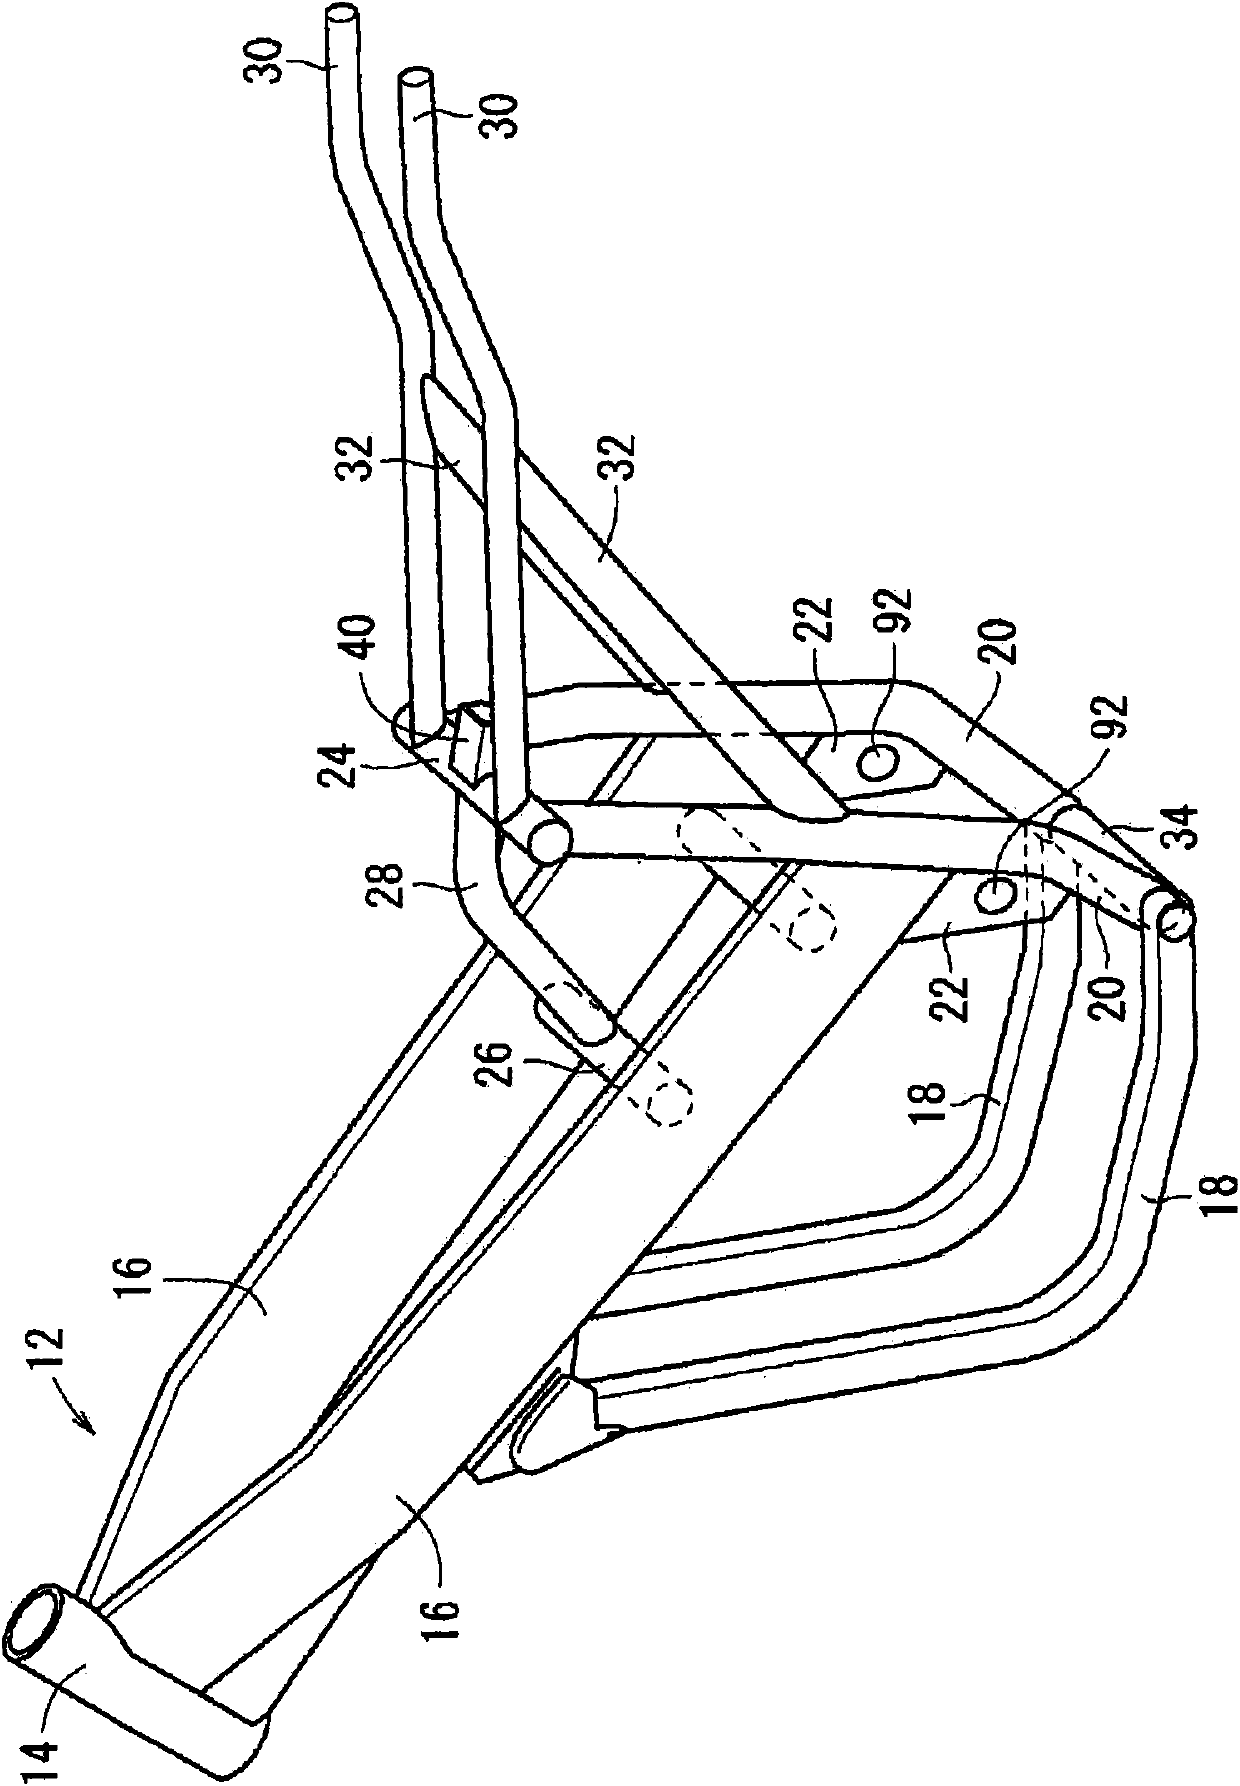 Frame structure of two-wheel motorcycle